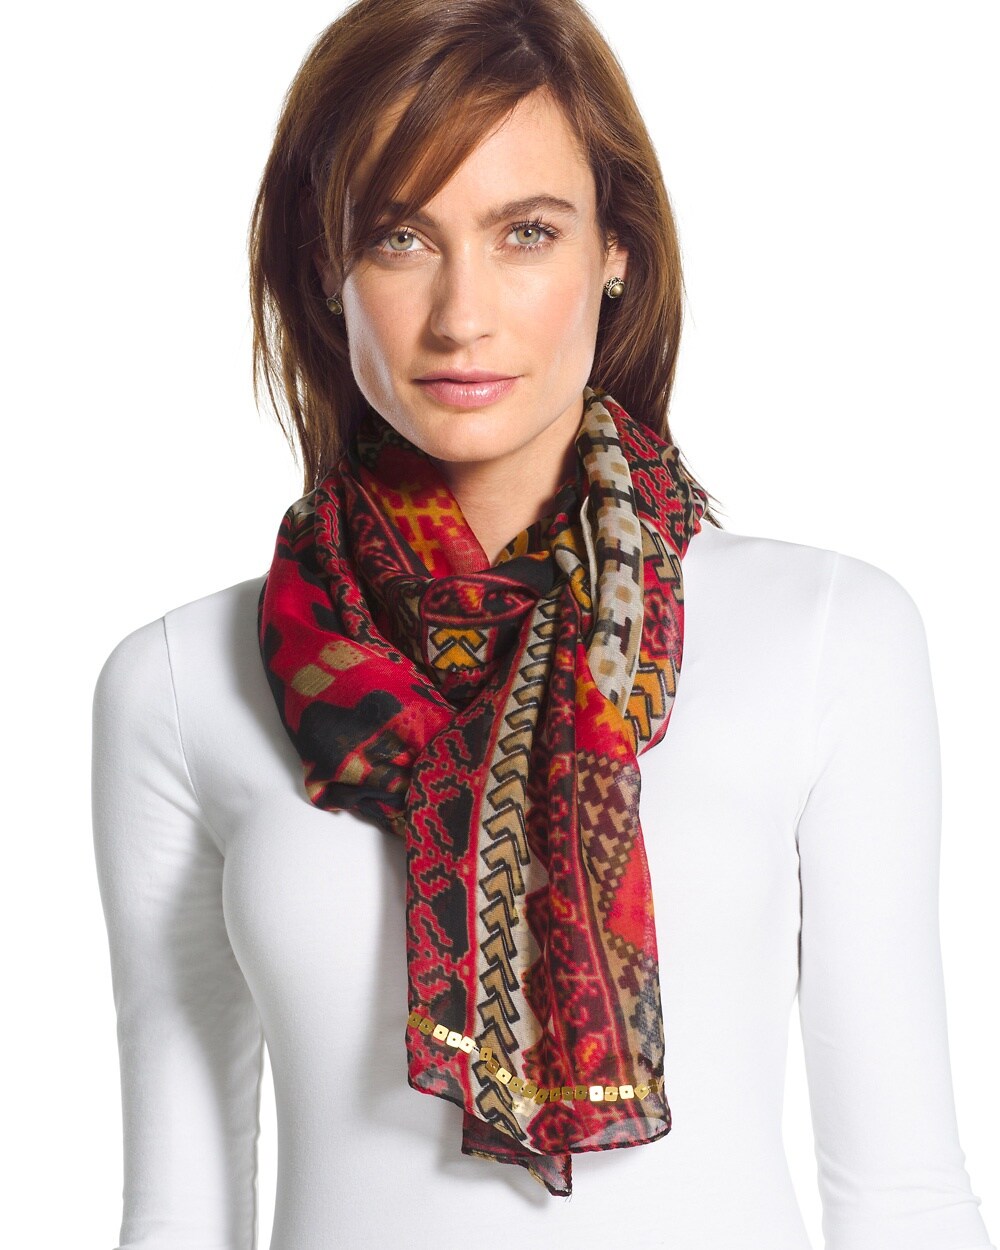 Patched Sequin Red Scarf - Chico's